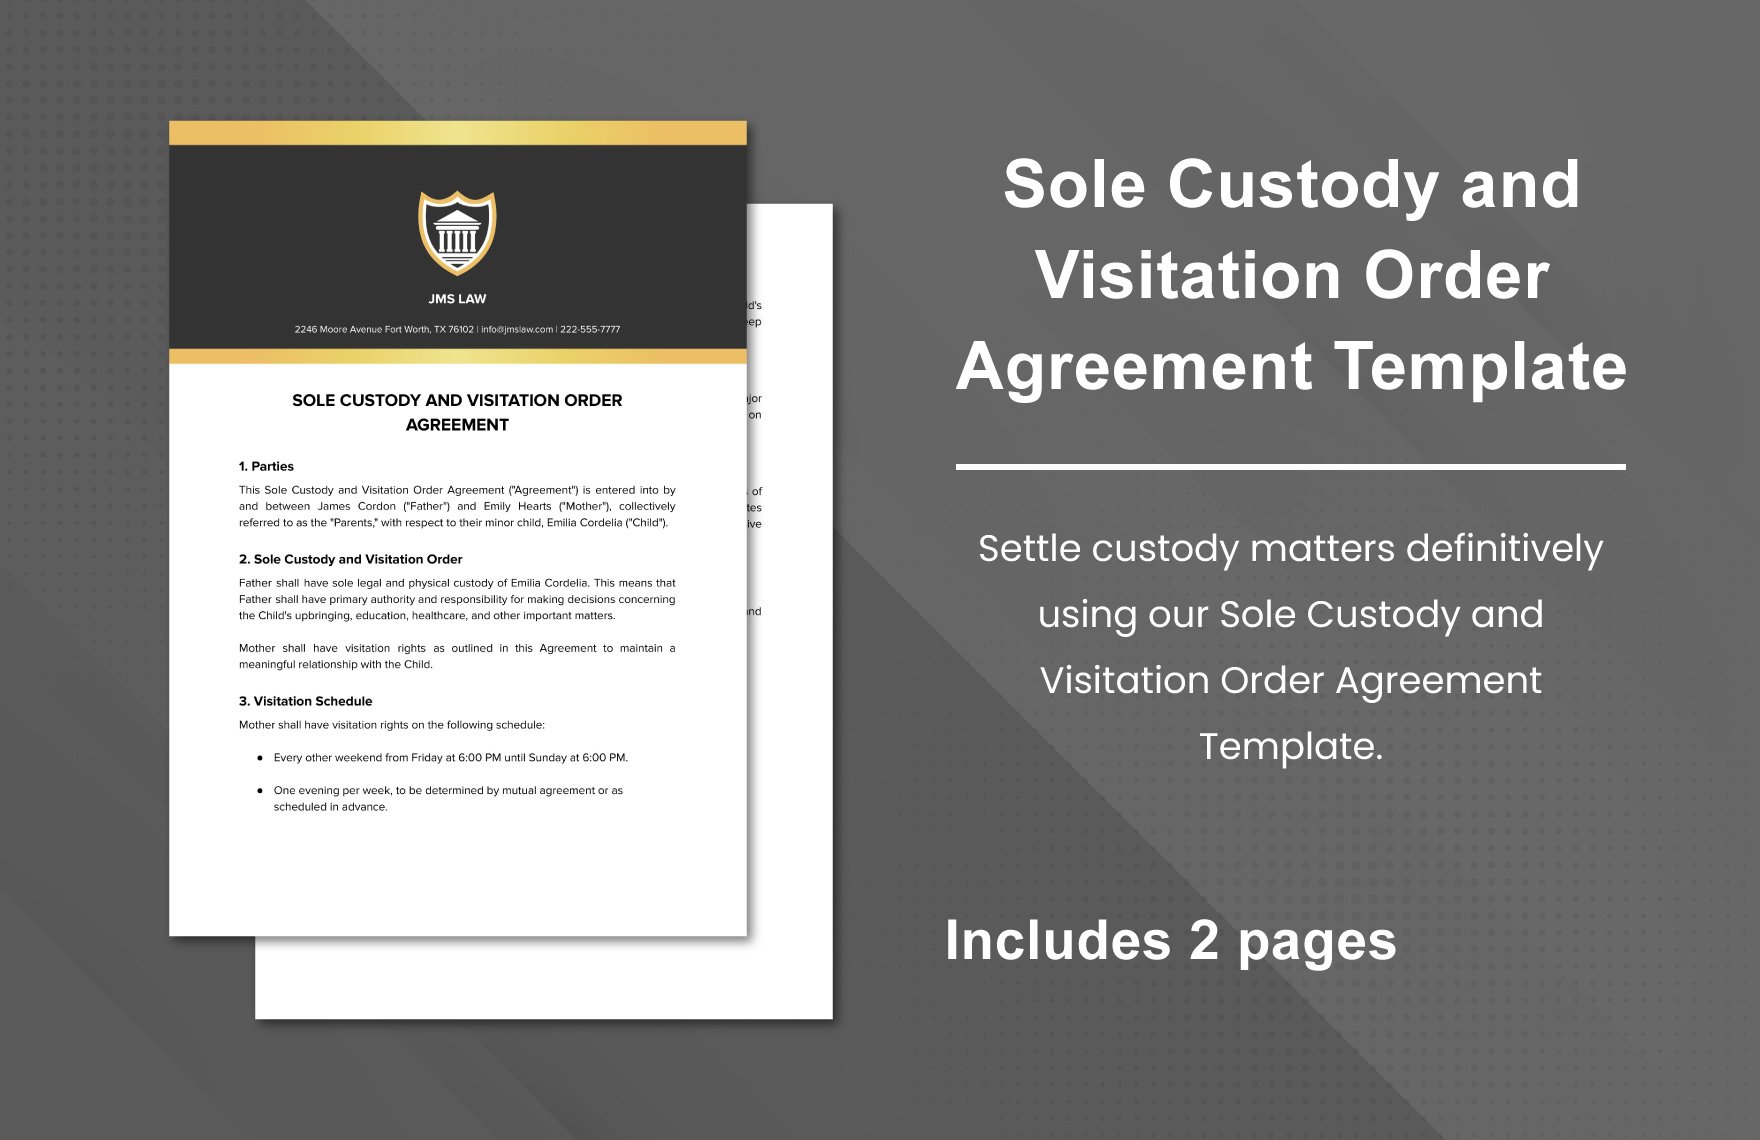 Sole Custody and Visitation Order Agreement Template